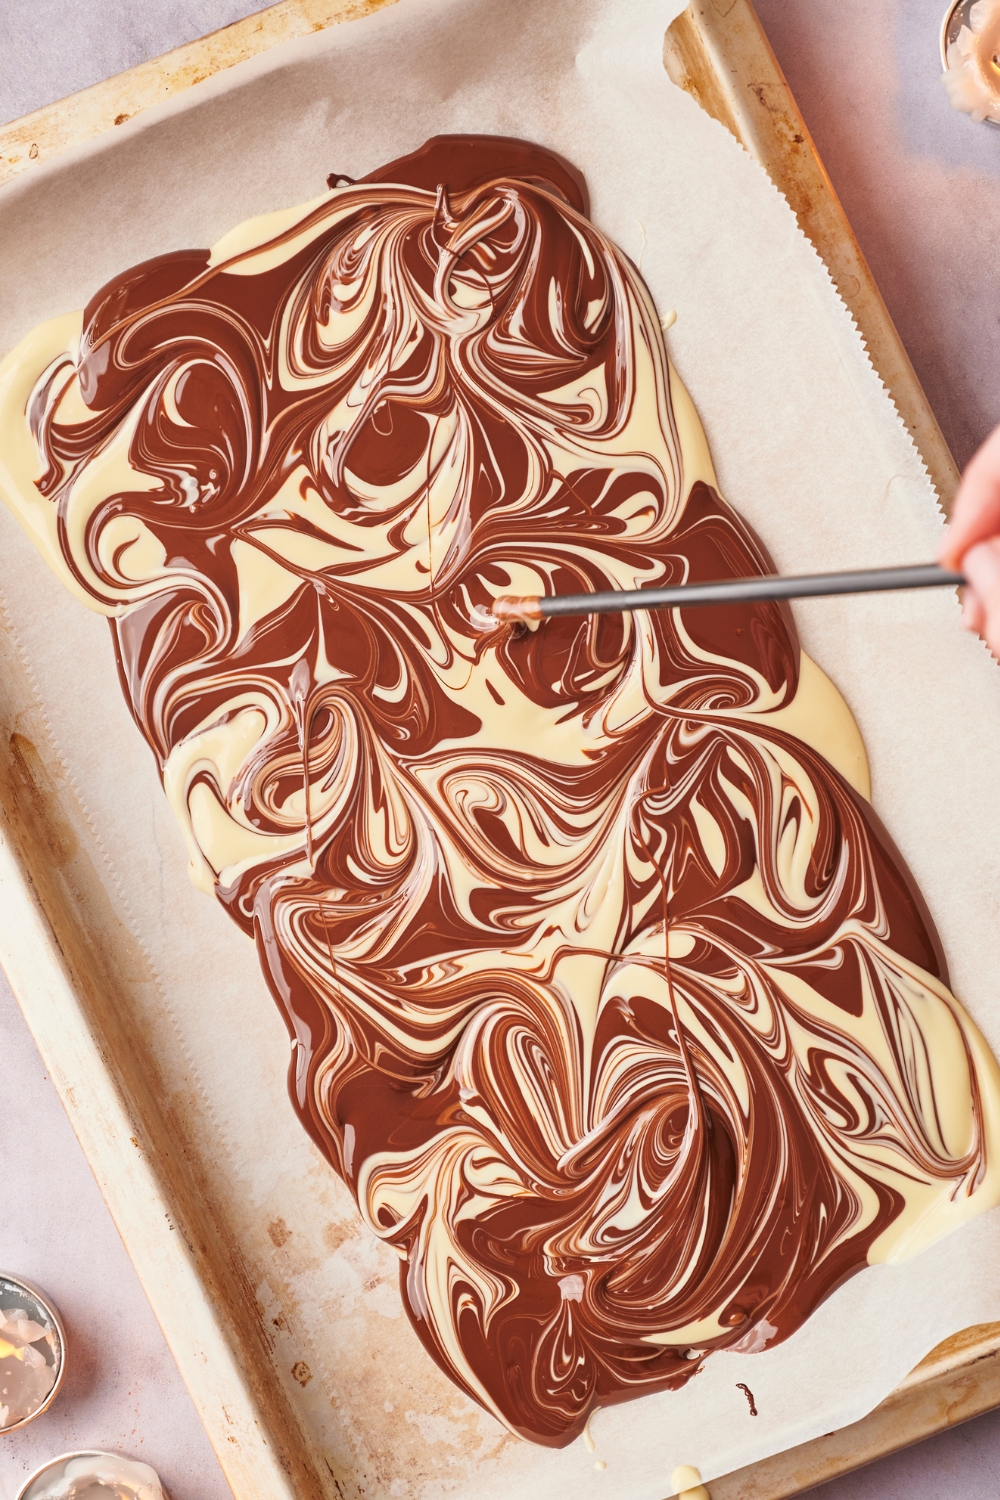 Melted chocolate in a checkered pattern on parchment paper. A straw is creating a marbled pattern.